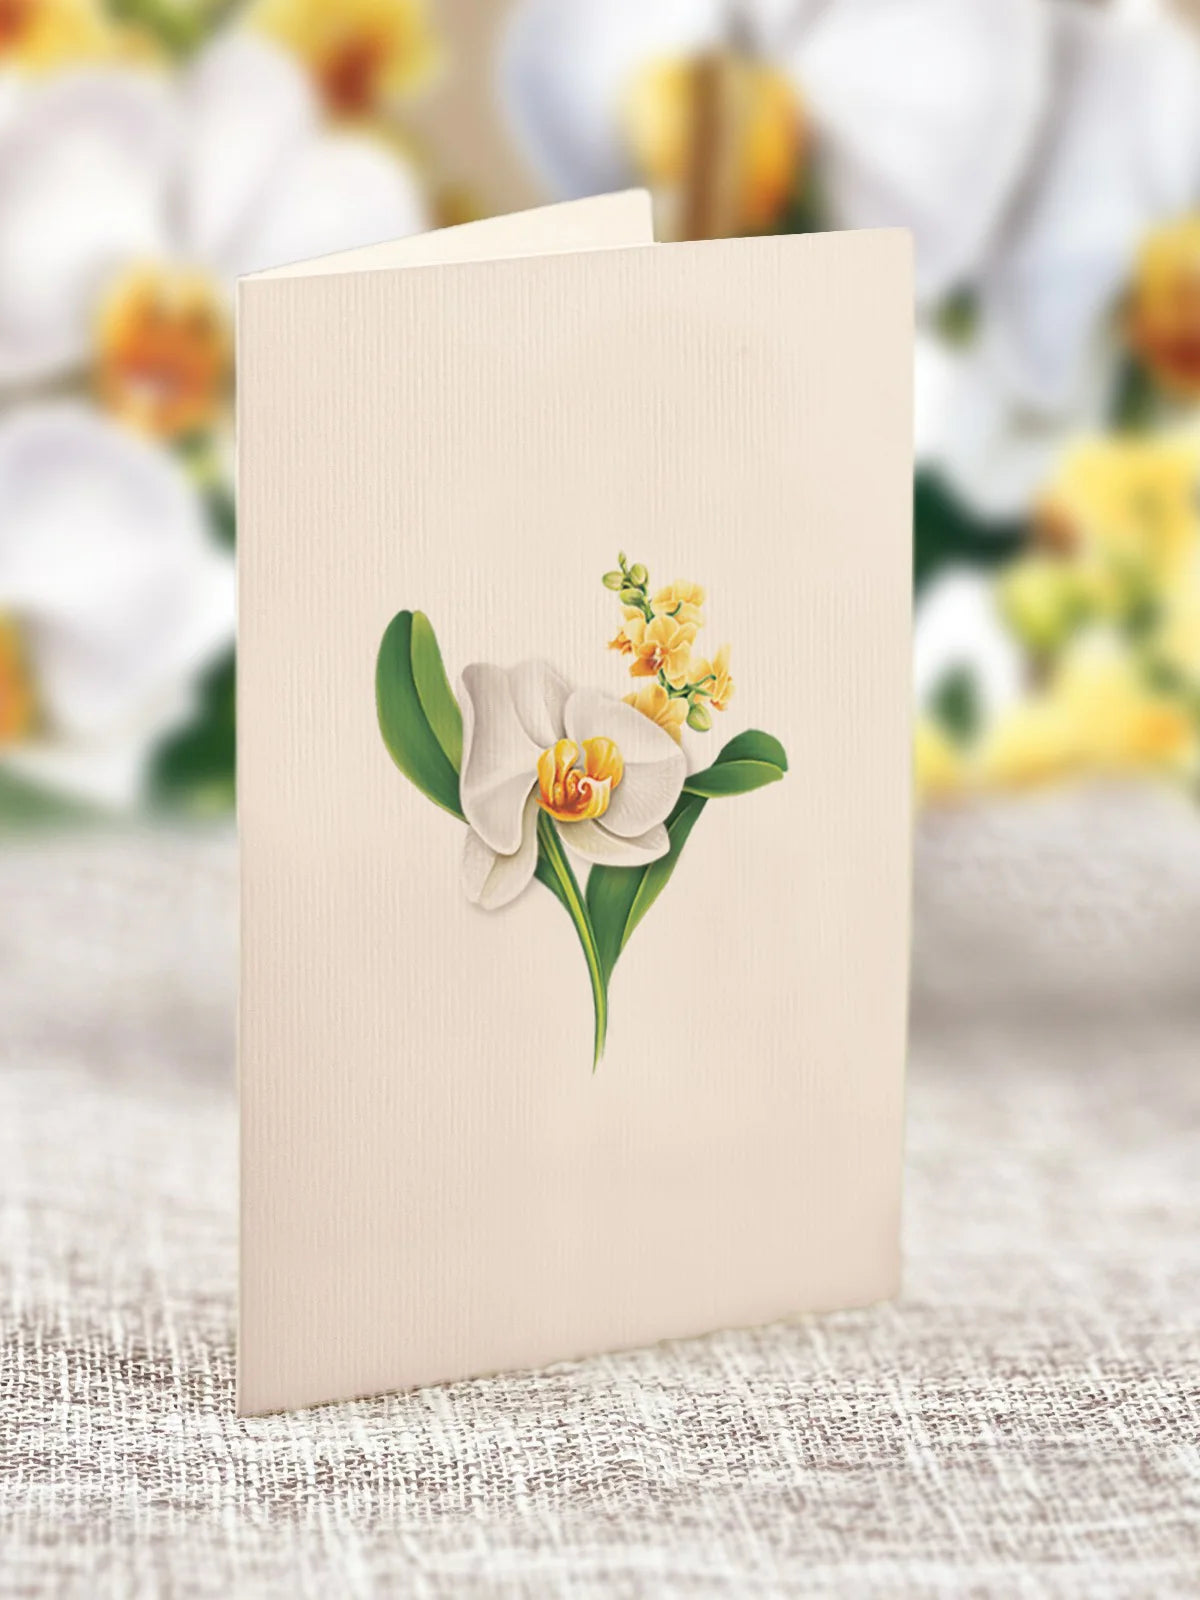 Serenity Orchid Mini Pop Up Flower Bouquet Greeting Card    